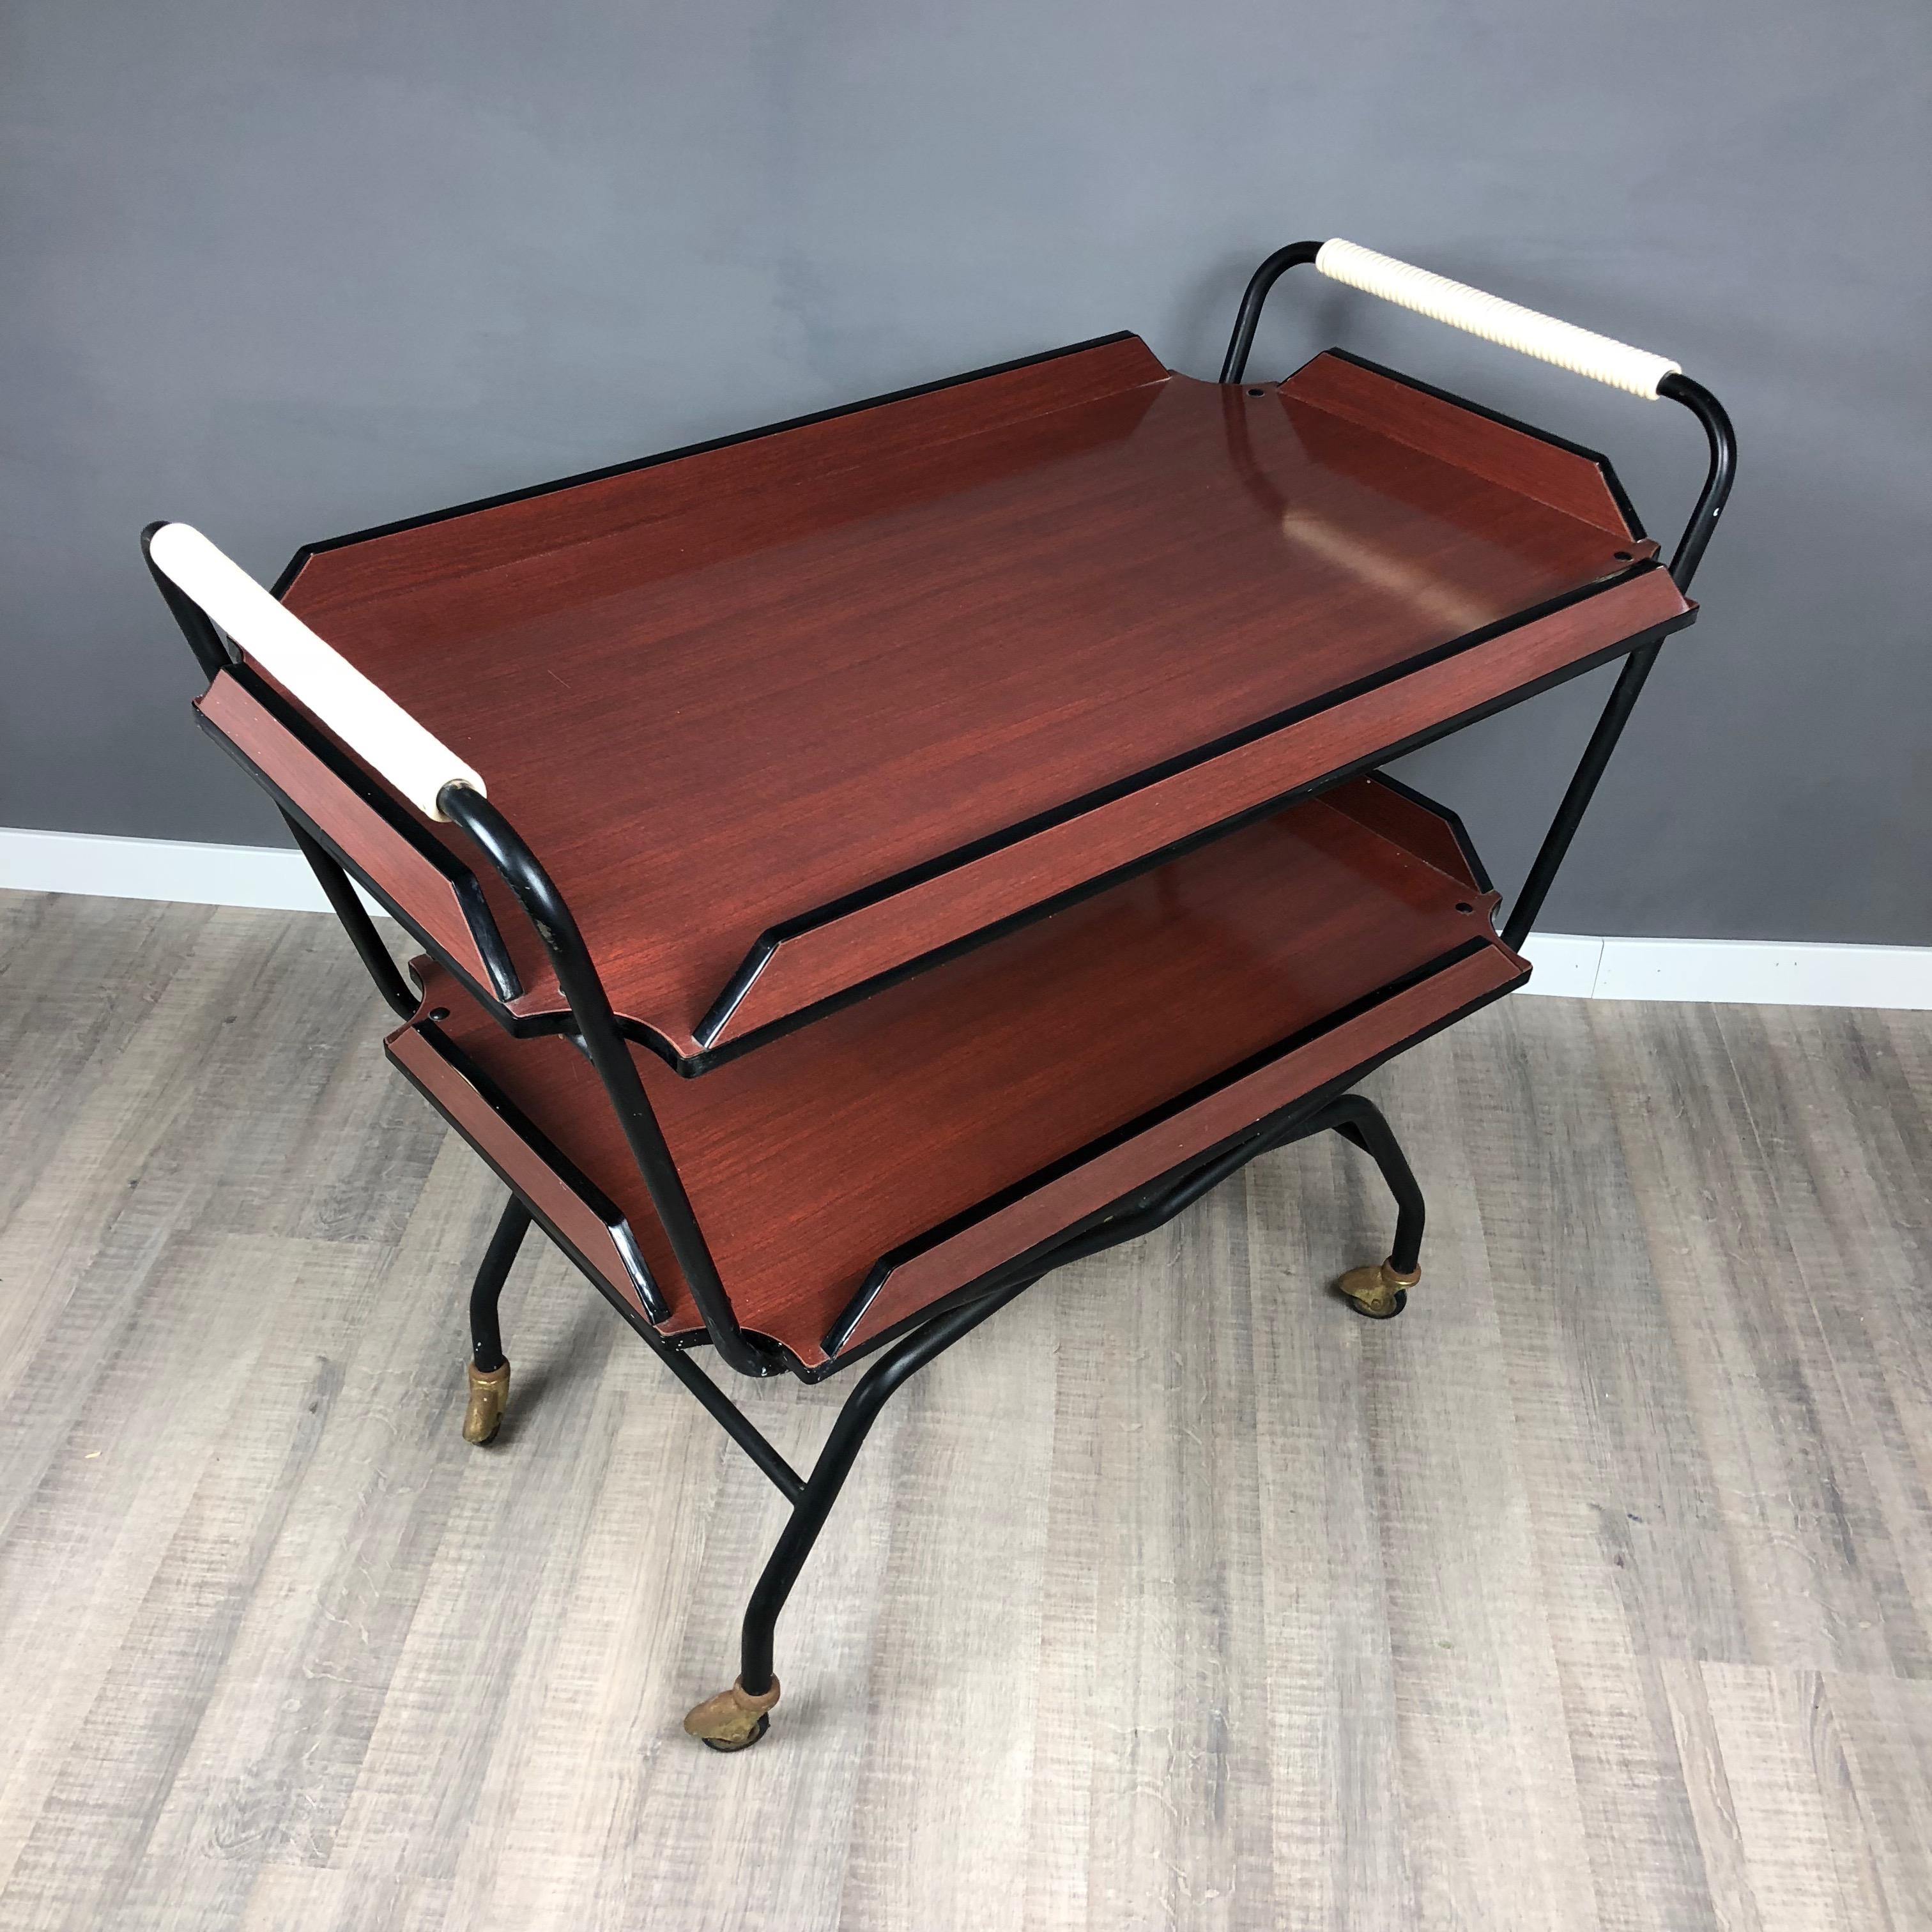 Mid-20th Century 1970s Serving Tray Bar Cart Trolley in Formica and Metal Black and Red Brown For Sale